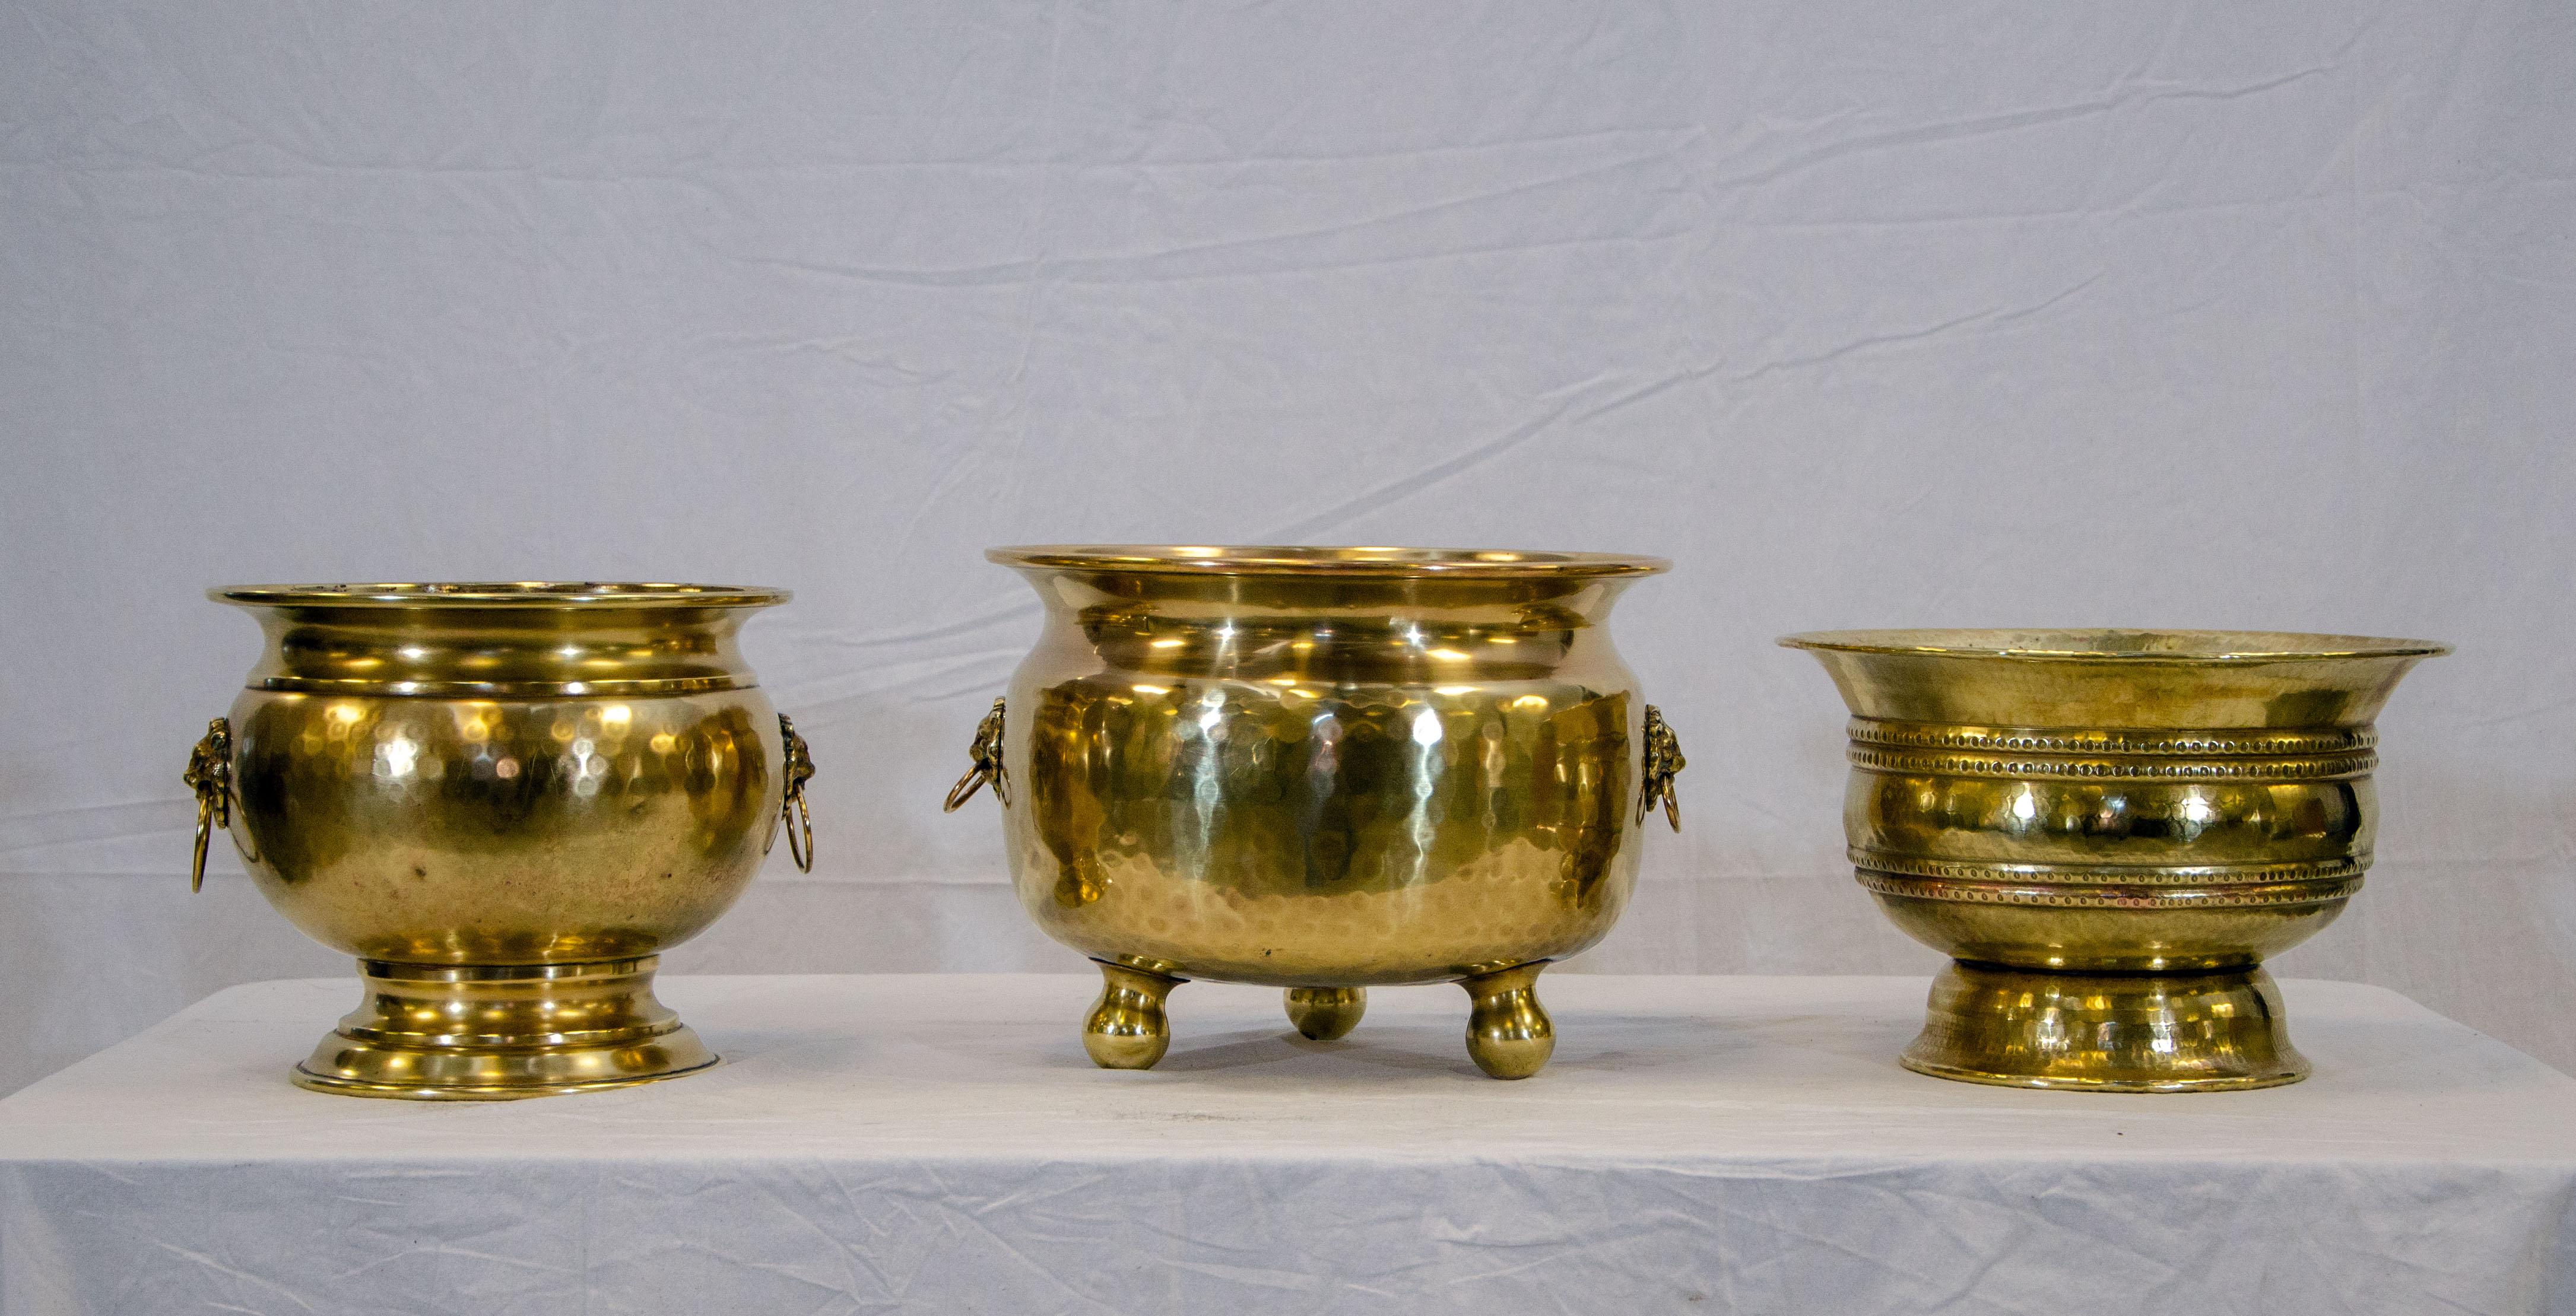 Collection of 3 Hammered Brass Jardinières, Cache Pot, Planters For Sale 2